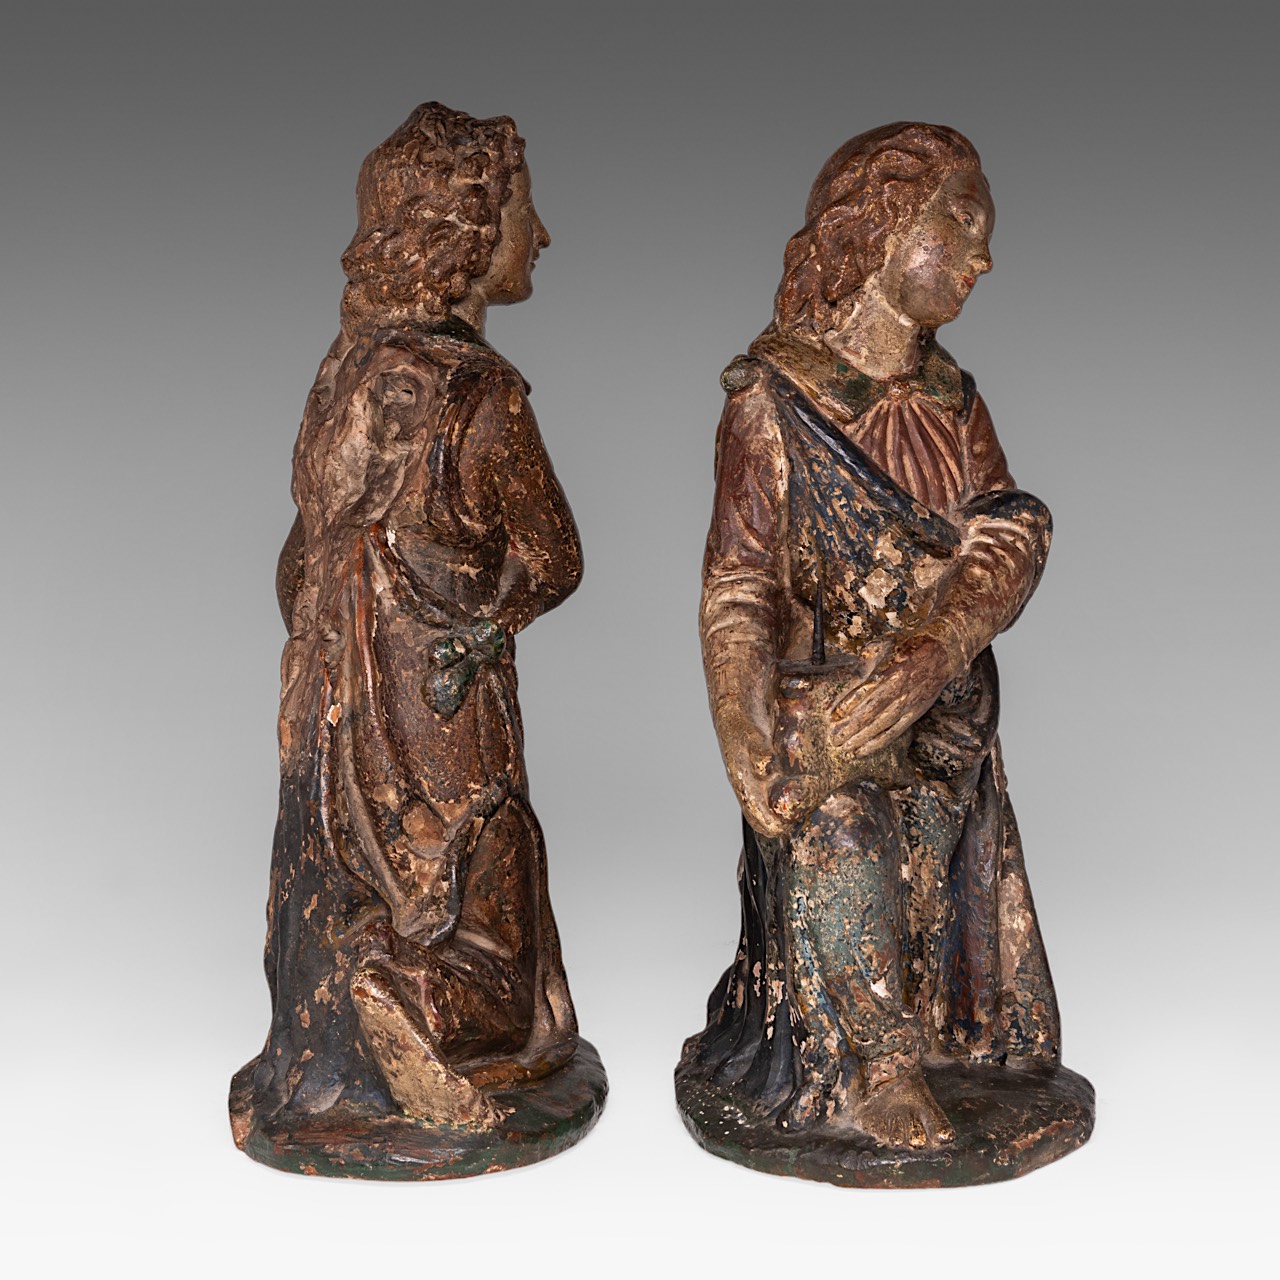 An exceptional pair of 16thC polychrome terracotta angels holding a pricket candlestick, H 38-39 cm - Image 5 of 7